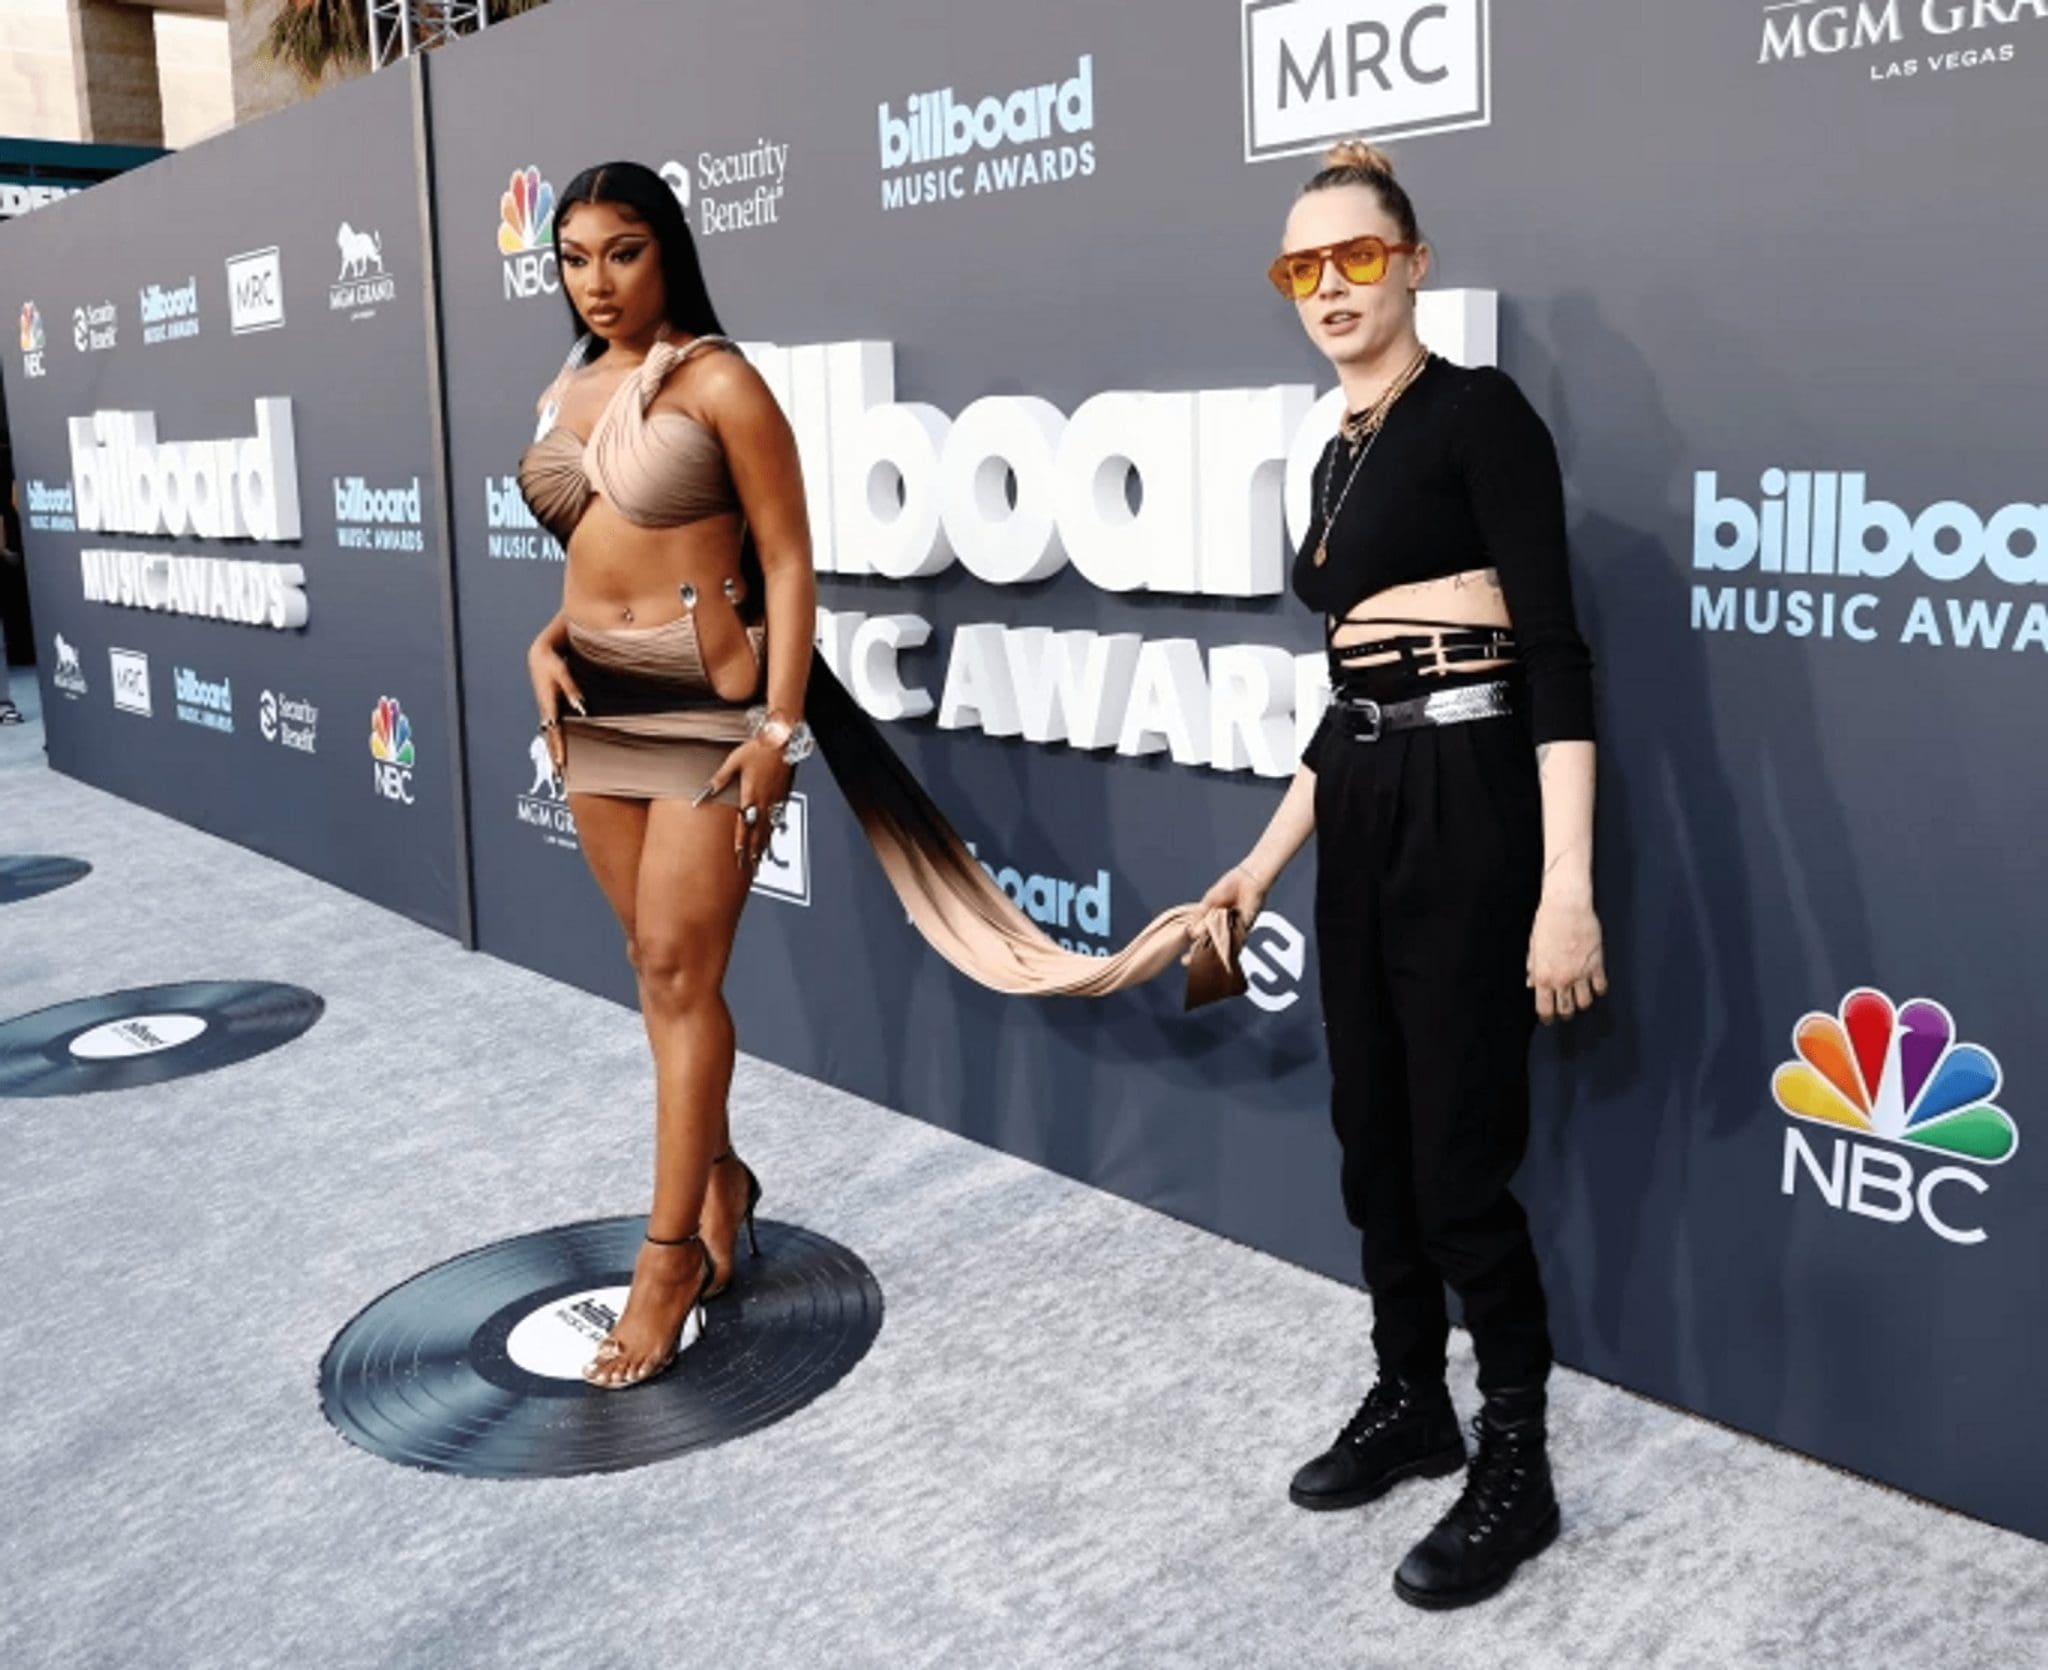 At The Billboard Music Awards, Cara Delevingne Publicly Responds To The Viral Megan Thee Stallion Antics